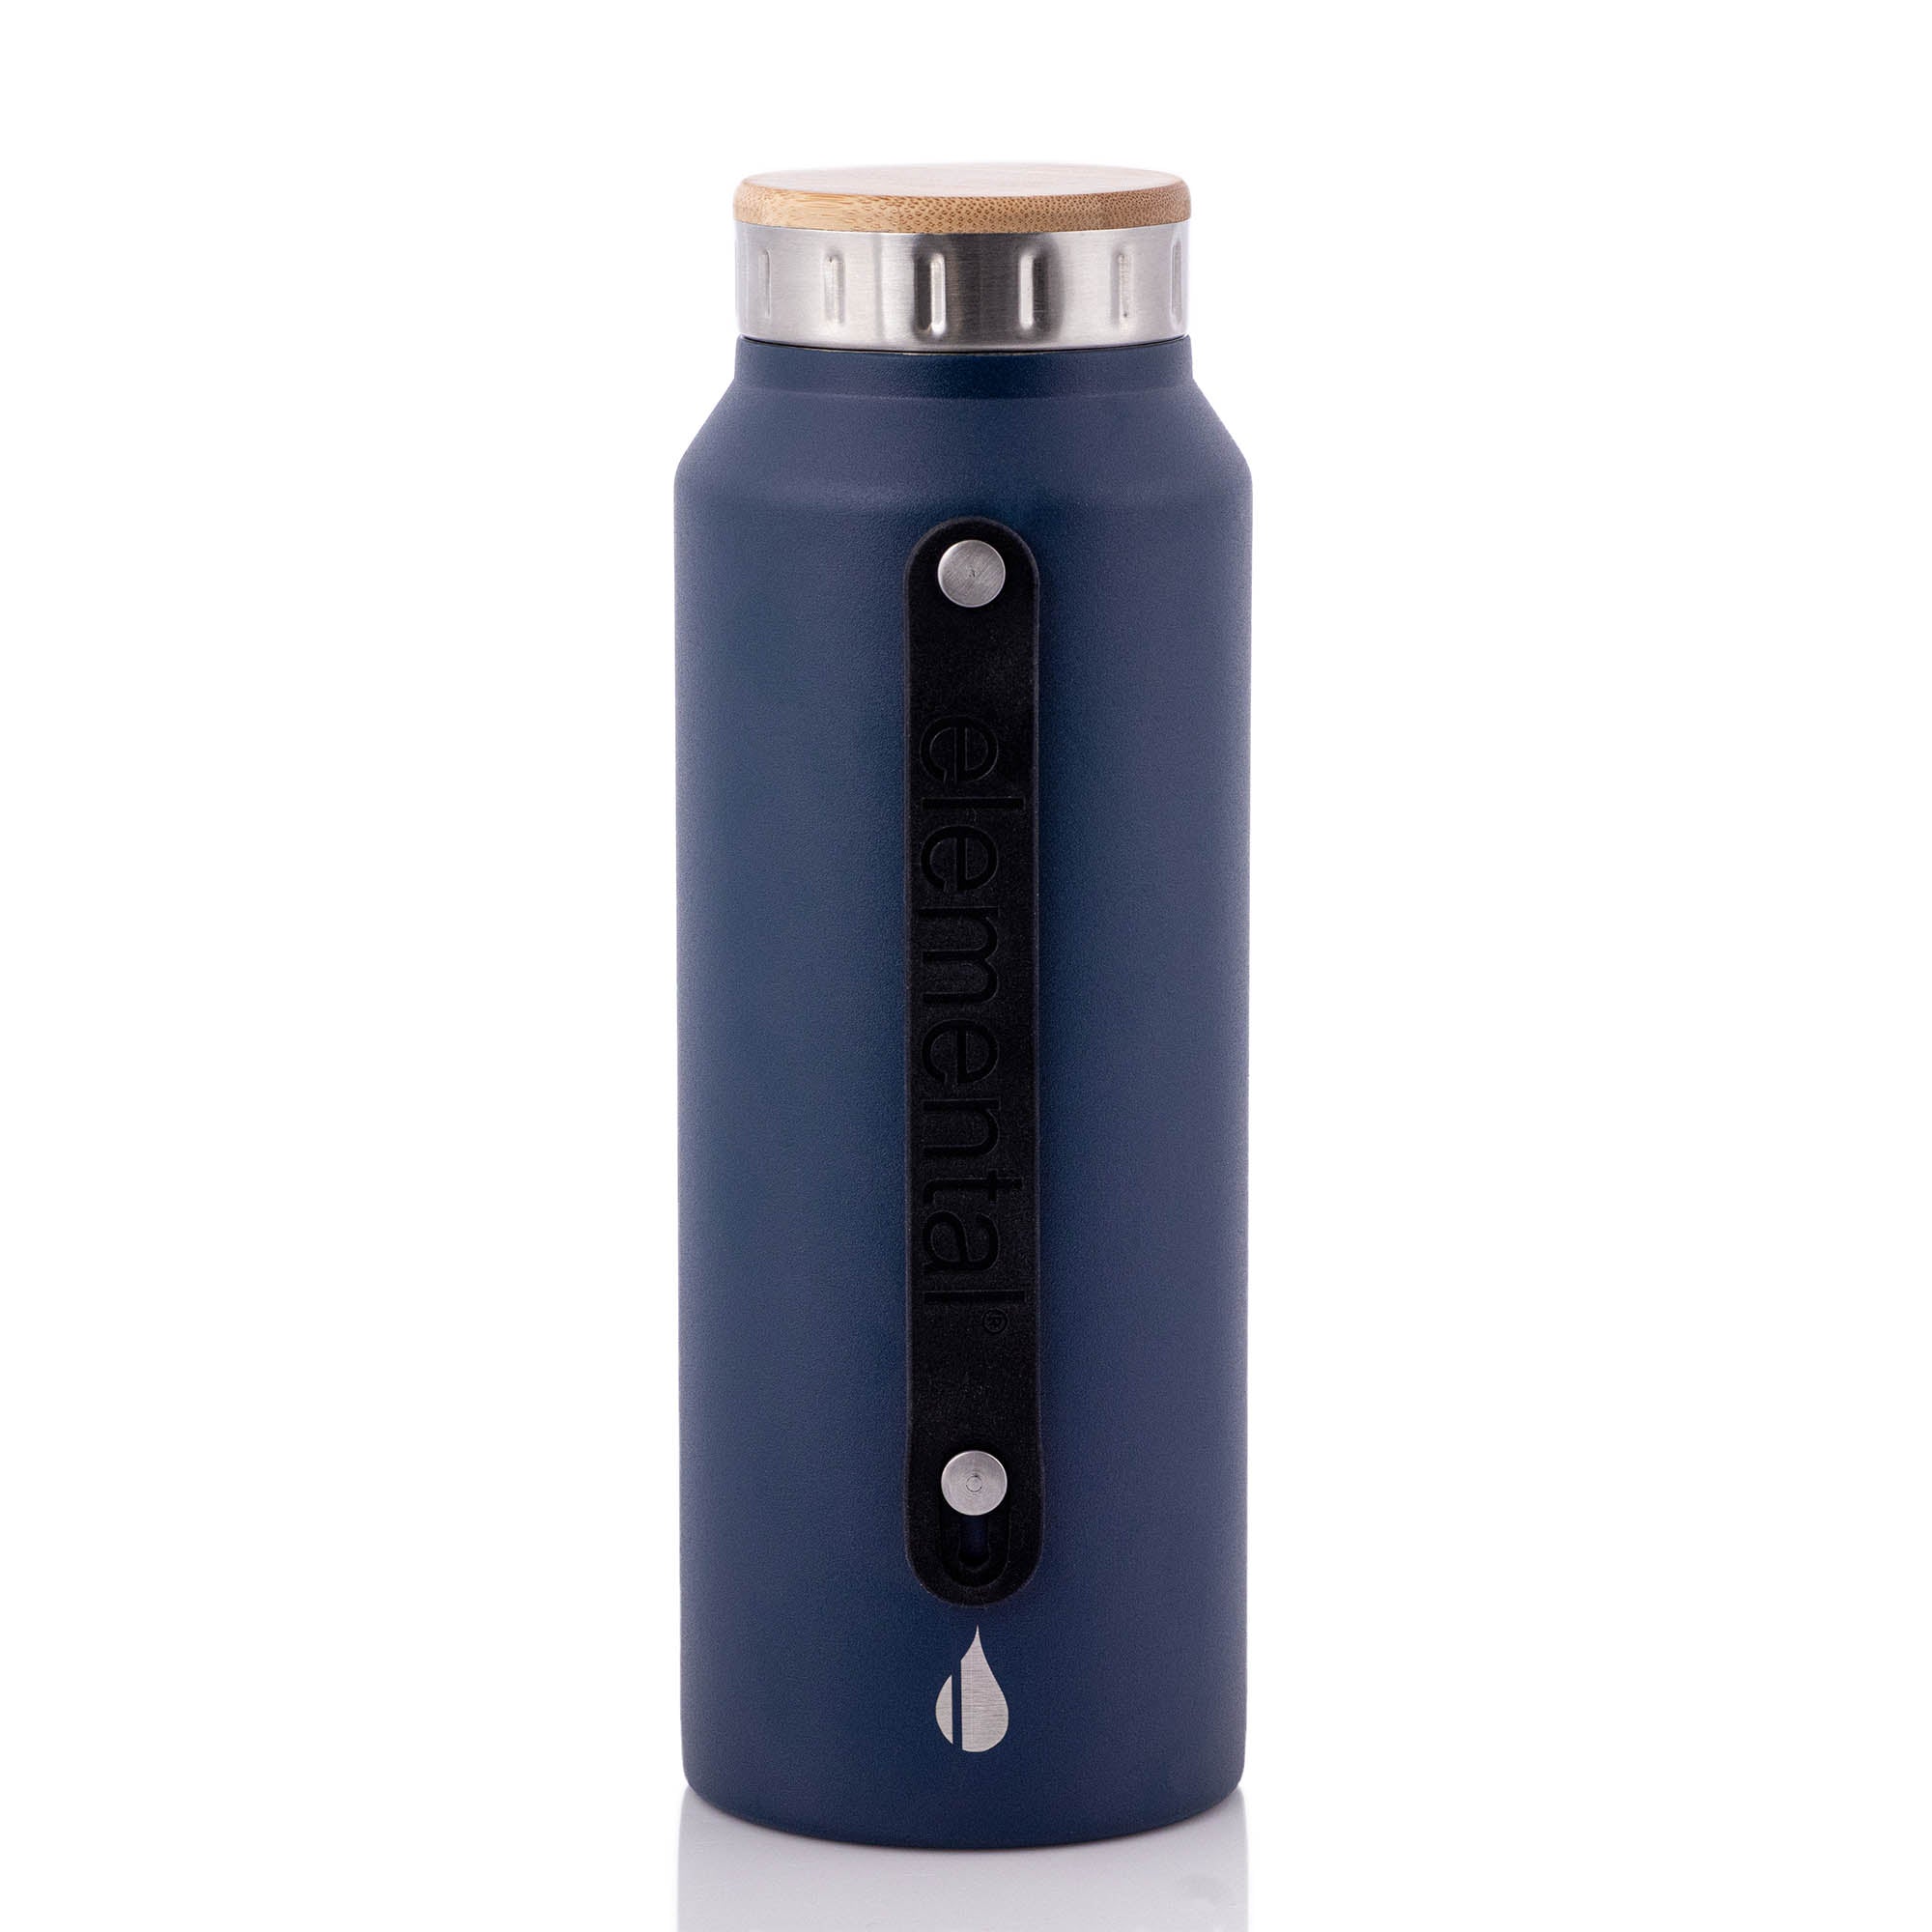 Customizable Elemental® 32 oz Insulated Stainless Steel Bottle in navy